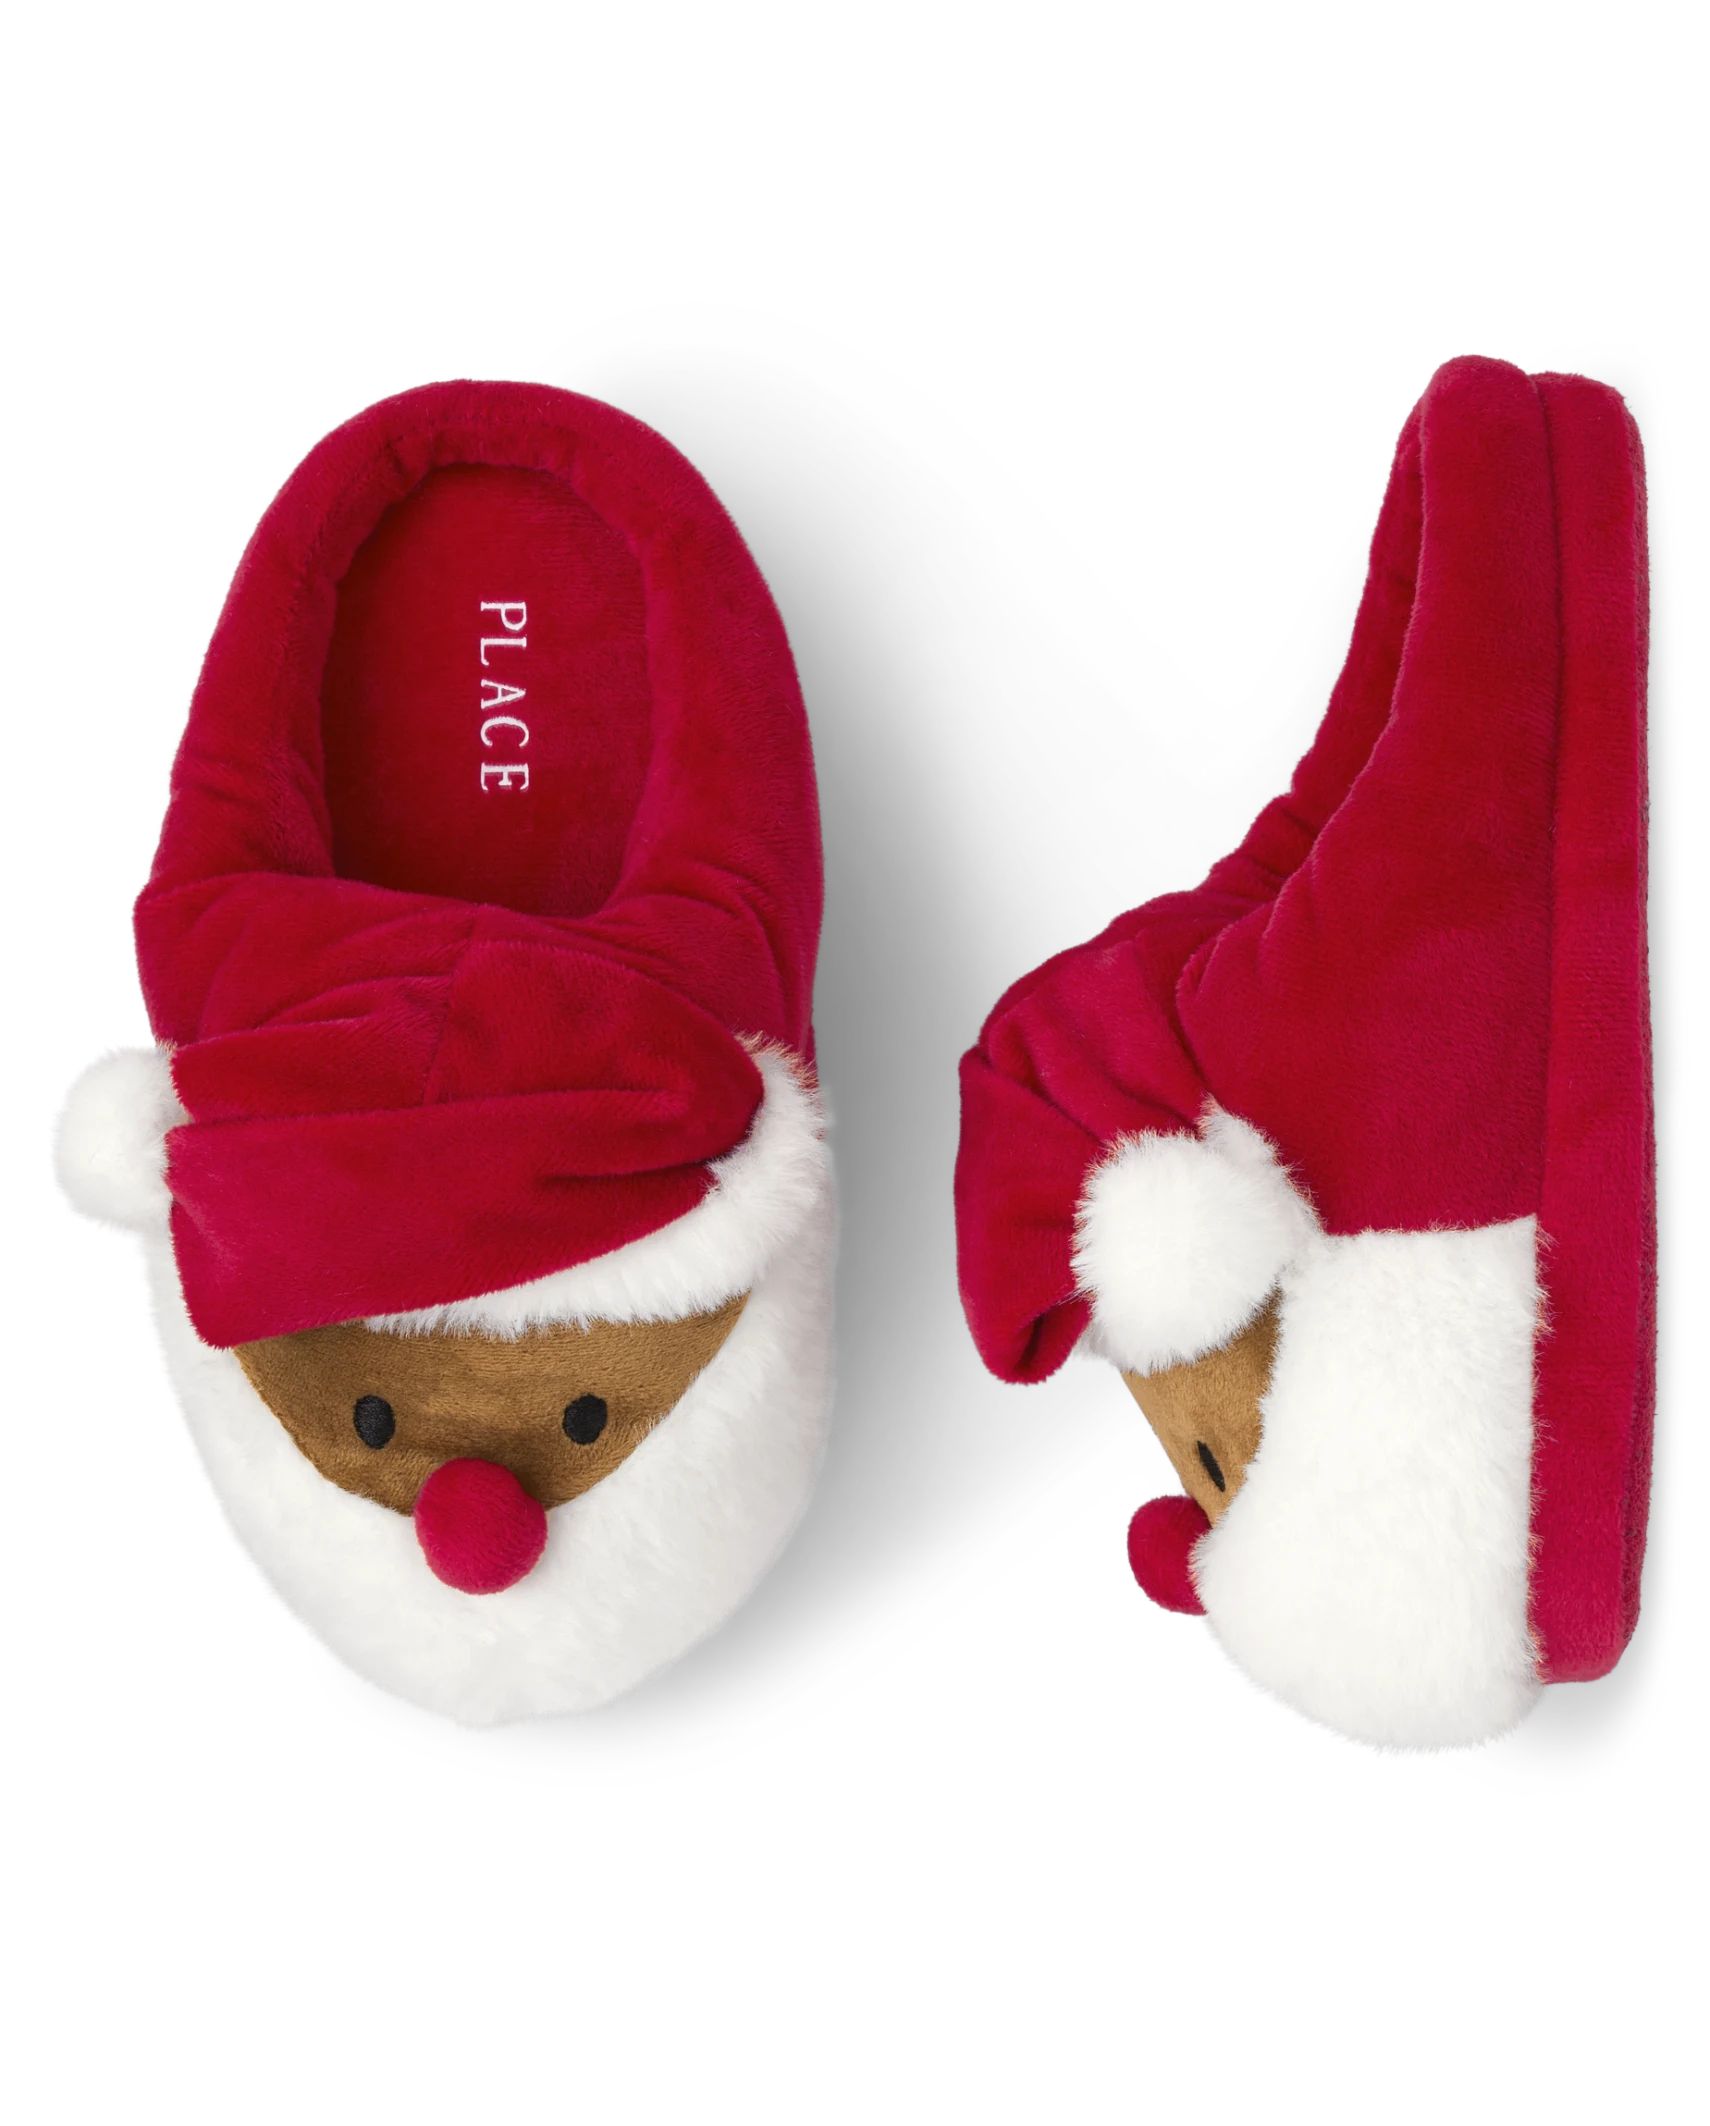 Unisex Kids Matching Family Santa Slippers - ruby | The Children's Place